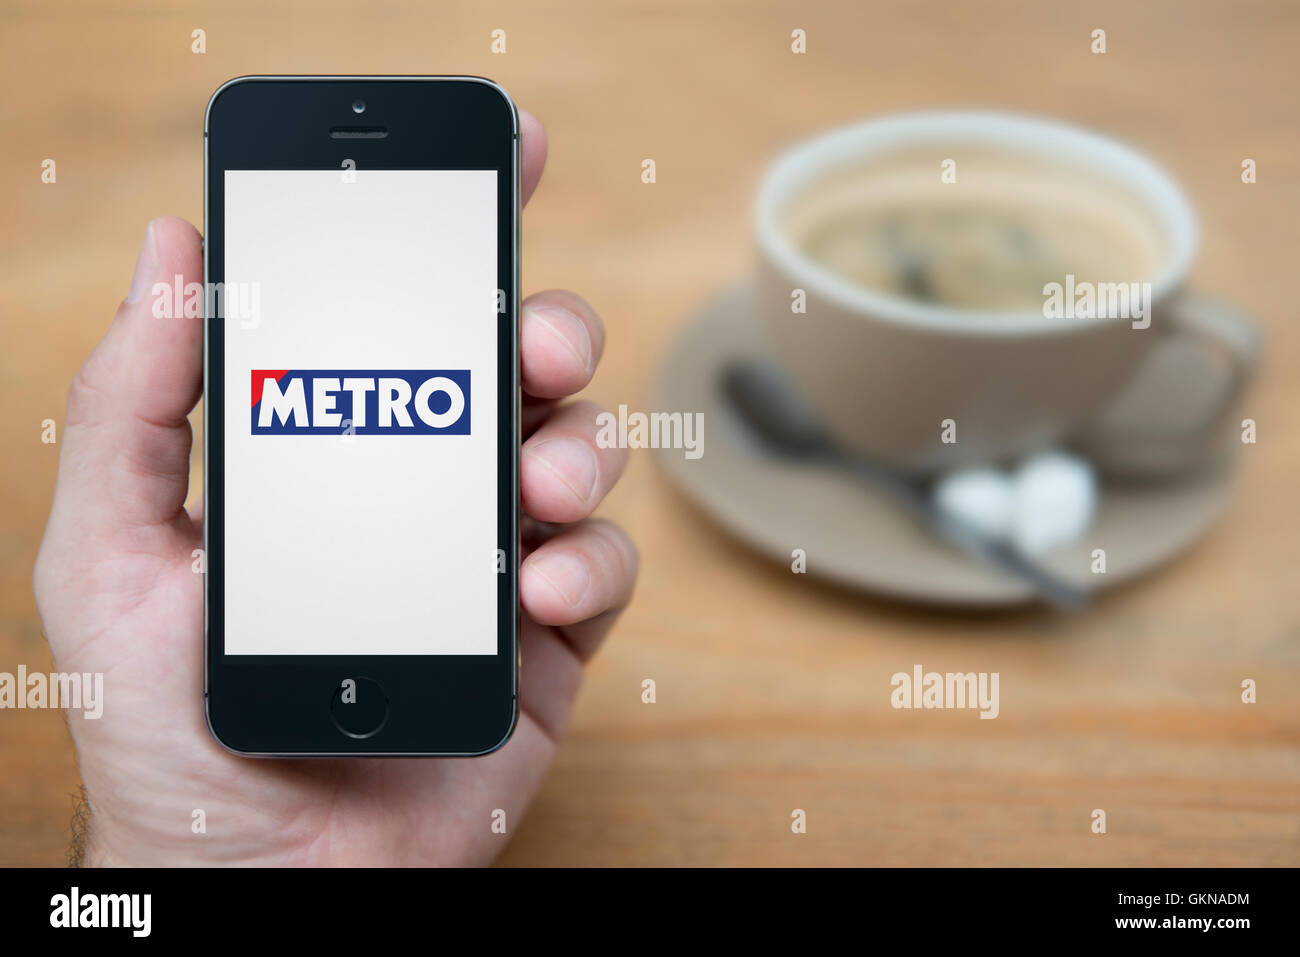 A man looks at his iPhone which displays the Metro logo, while sat with a cup of coffee (Editorial use only). Stock Photo